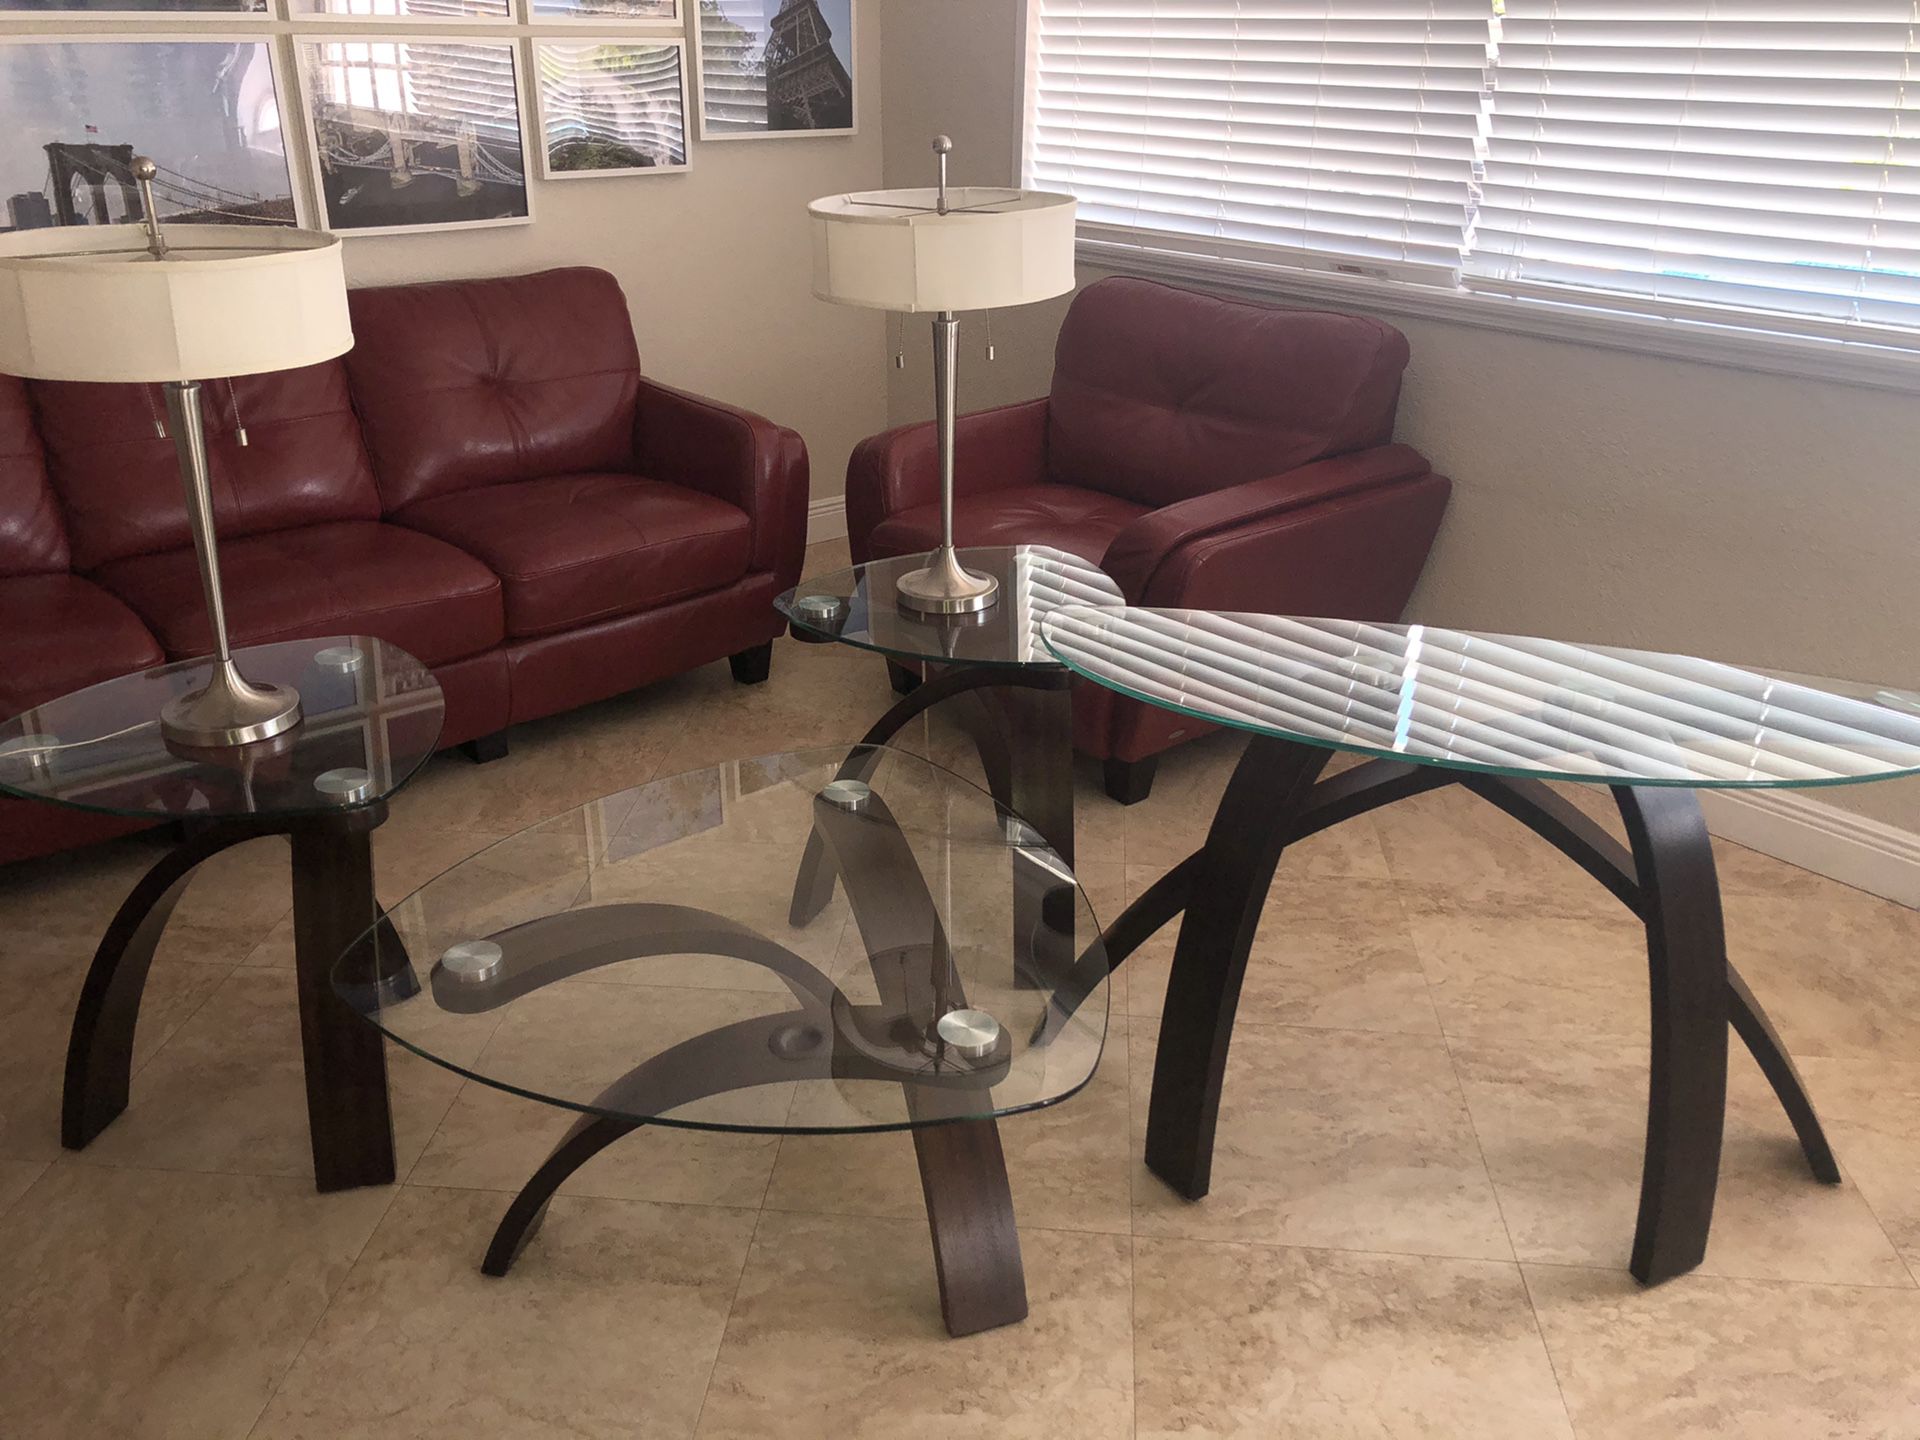 4 Pc Jace Table set: 1 Coffee Table, 1 Console Table, 2 Side Tables